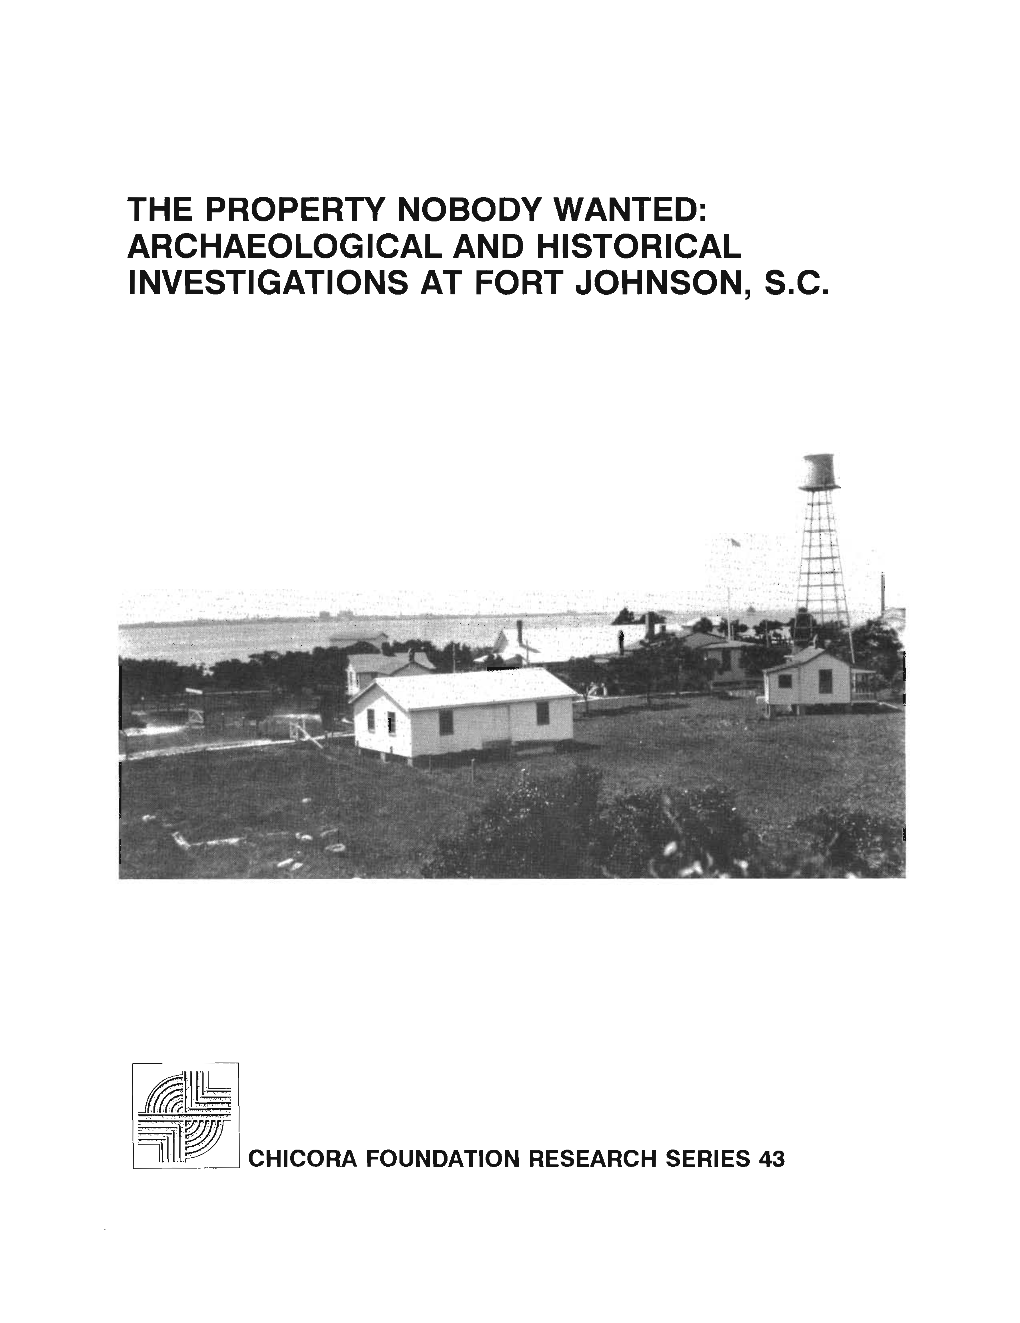 Archaeological and Historical Investigations at Fort Johnson, SC